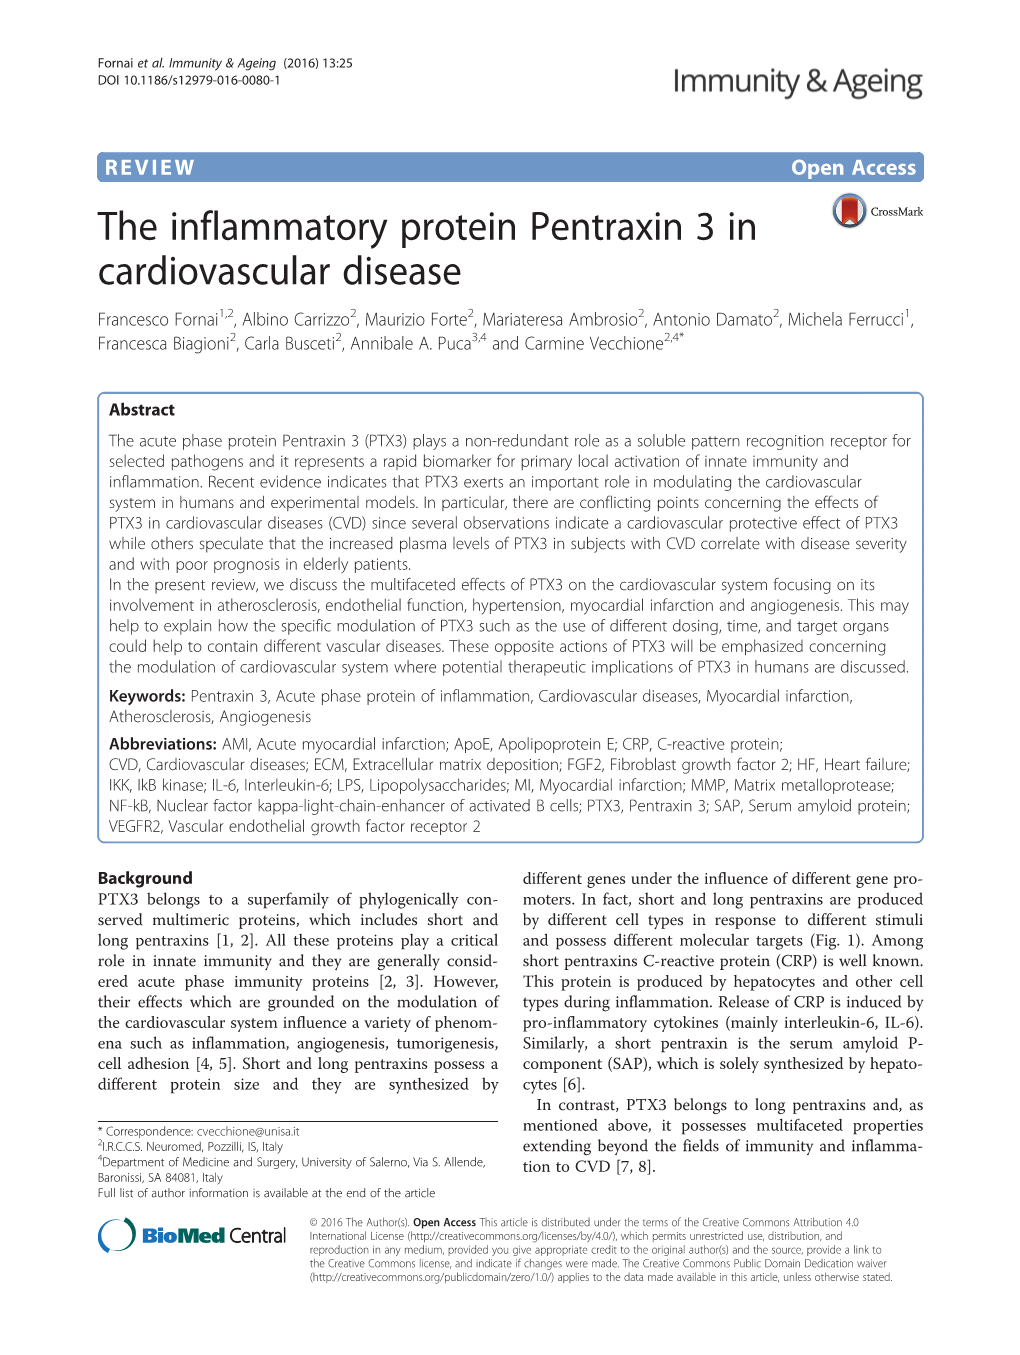 The Inflammatory Protein Pentraxin 3 in Cardiovascular Disease